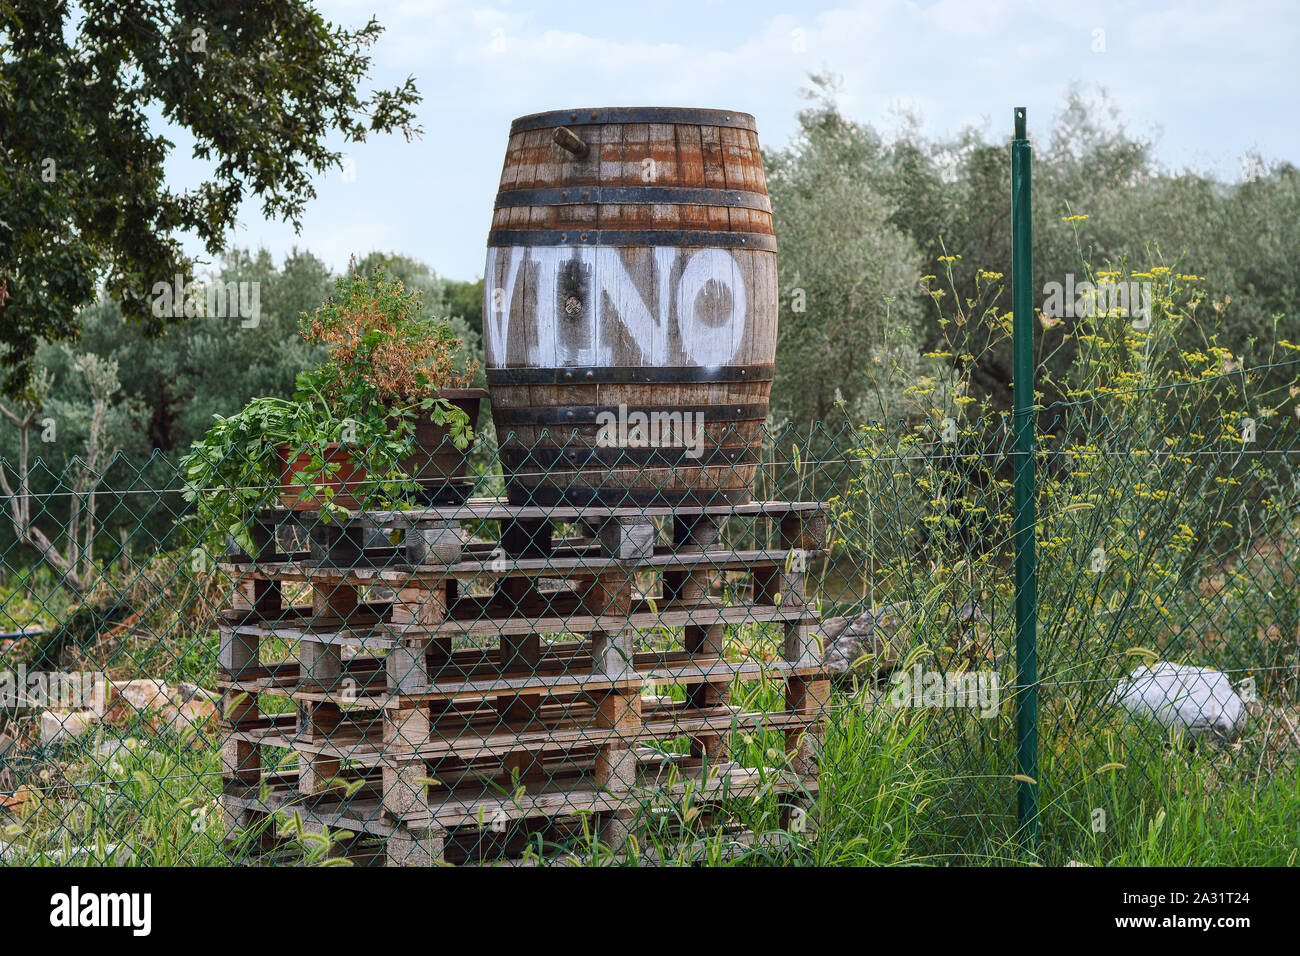 View of the barrel with the inscription Wine, standing on a stack of pallets. The construction is used as a pointer. Stock Photo